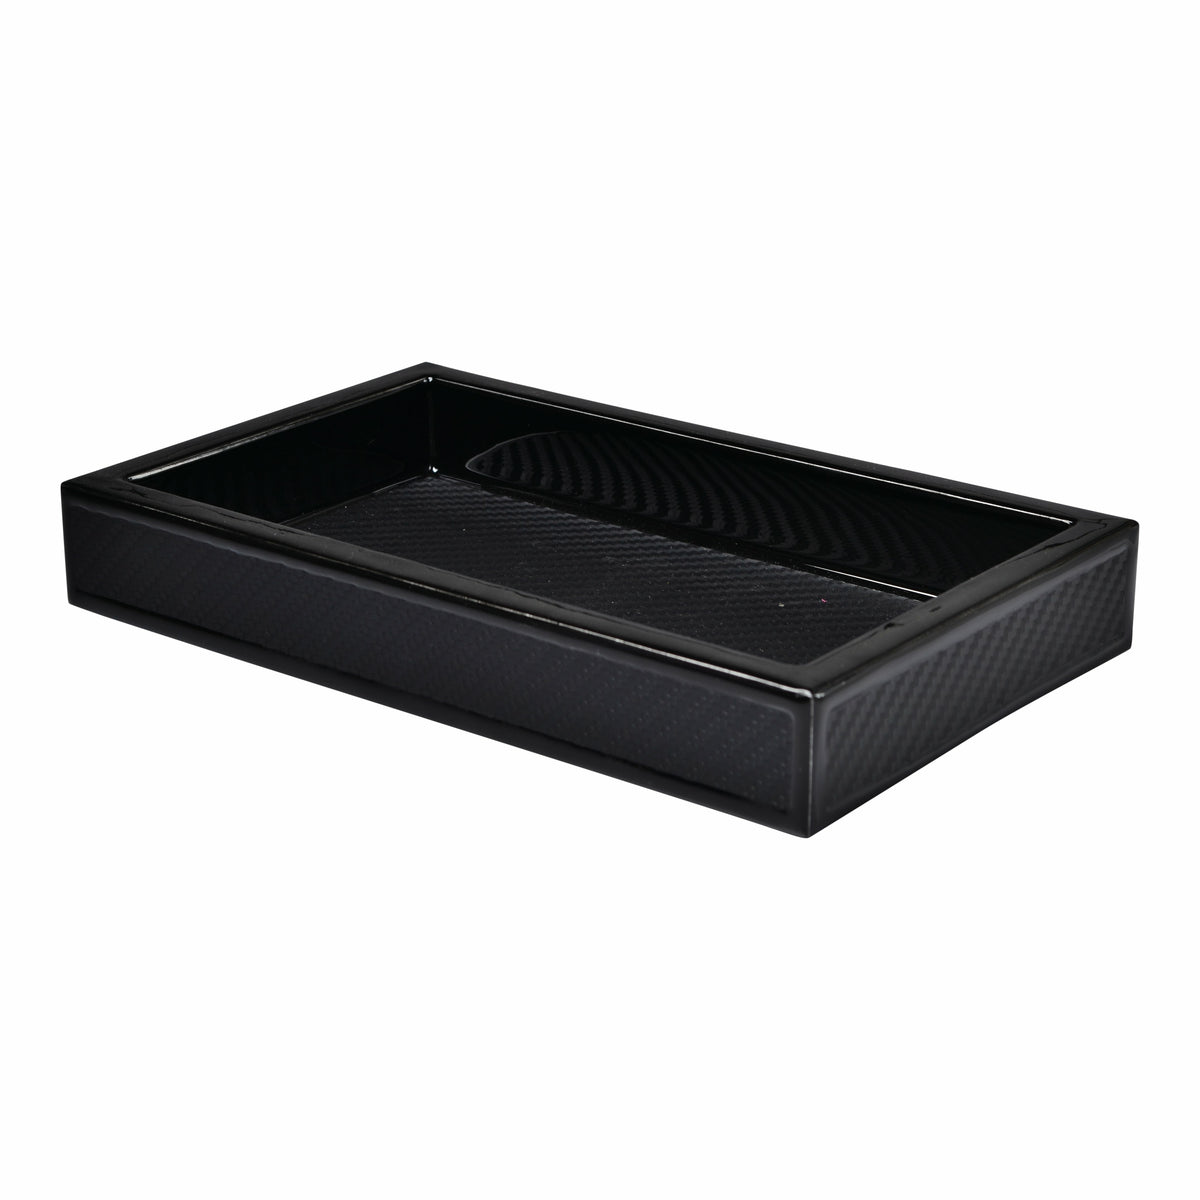 Mike and Ally Le Mans Bath Accessories Tray Black